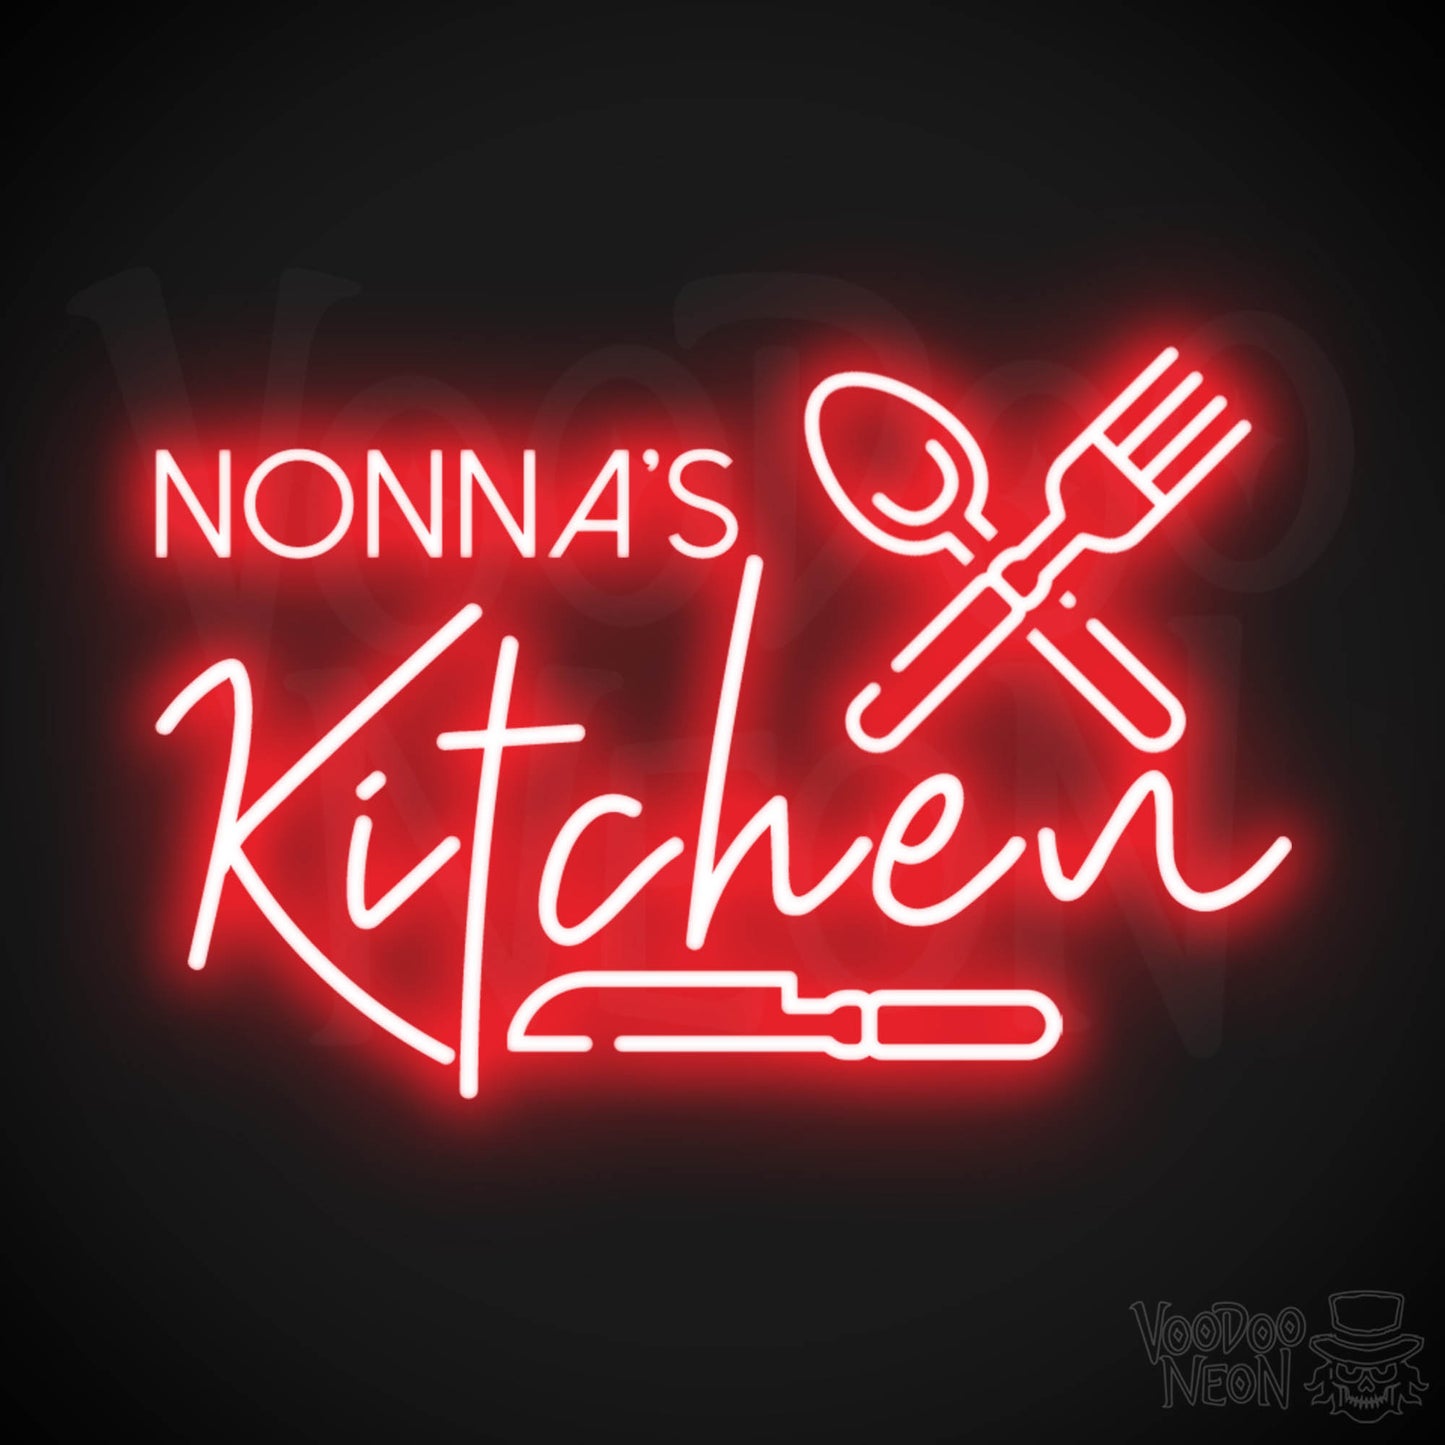 Nonna's Kitchen Neon Sign - Neon Nona's Kitchen Sign - Wall Art - Color Red